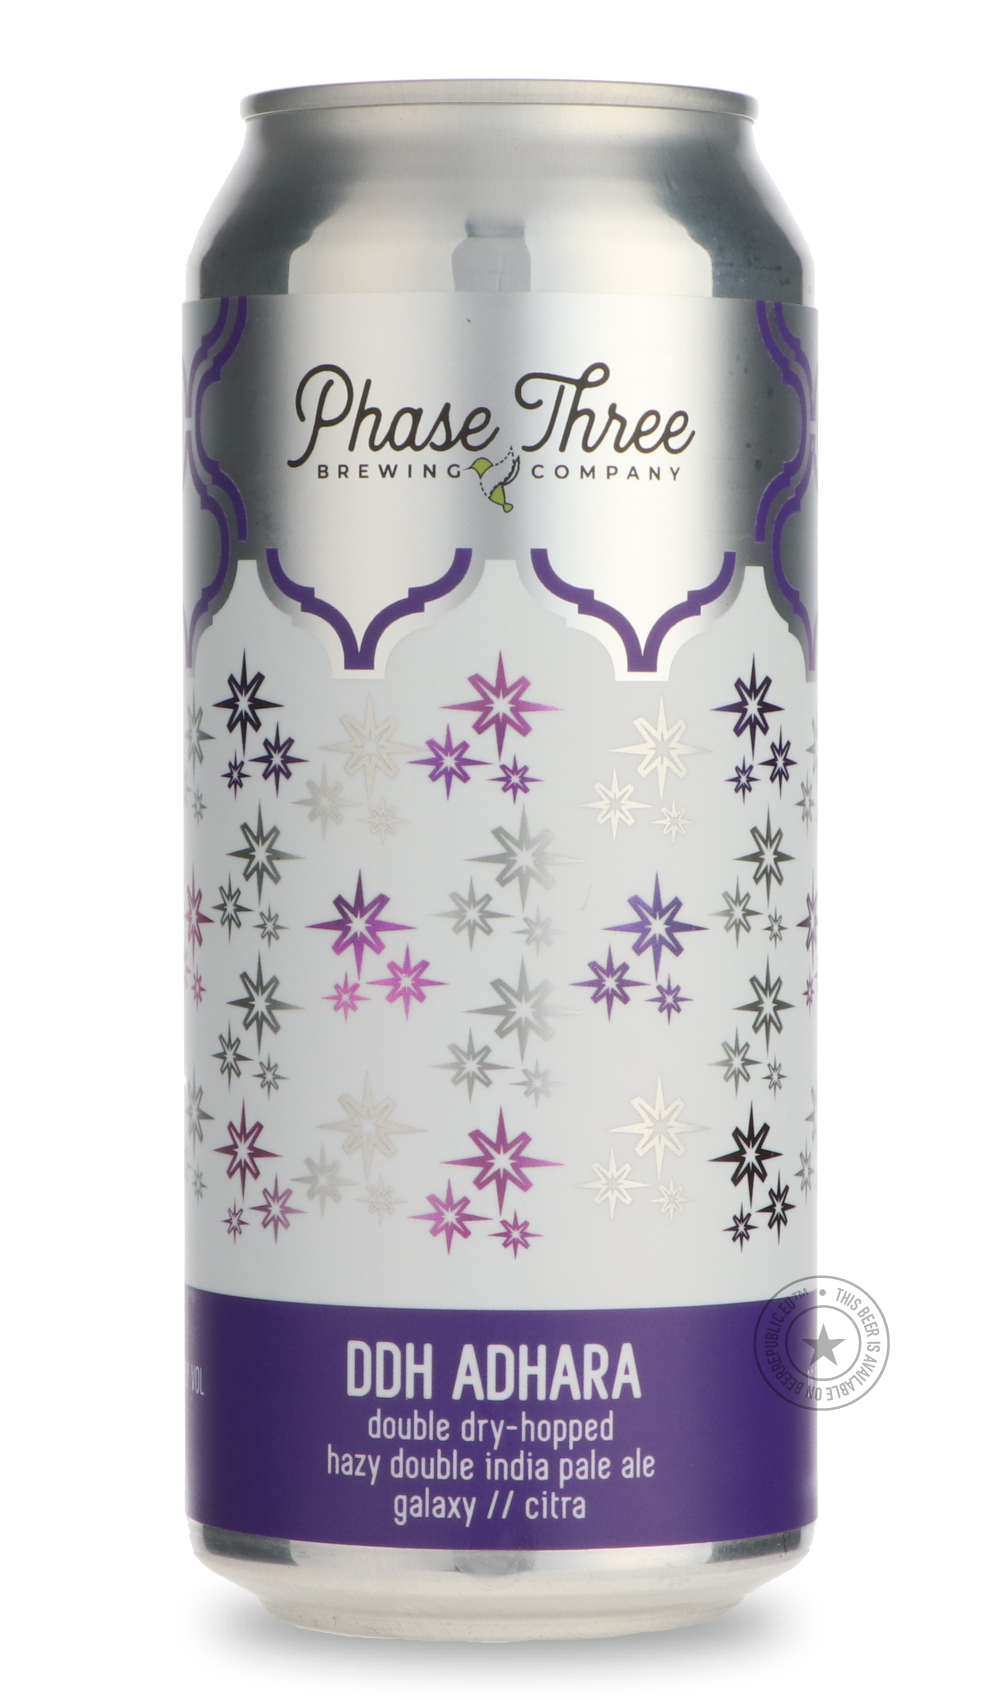 -Phase Three- DDH Adhara-IPA- Only @ Beer Republic - The best online beer store for American & Canadian craft beer - Buy beer online from the USA and Canada - Bier online kopen - Amerikaans bier kopen - Craft beer store - Craft beer kopen - Amerikanisch bier kaufen - Bier online kaufen - Acheter biere online - IPA - Stout - Porter - New England IPA - Hazy IPA - Imperial Stout - Barrel Aged - Barrel Aged Imperial Stout - Brown - Dark beer - Blond - Blonde - Pilsner - Lager - Wheat - Weizen - Amber - Barley W